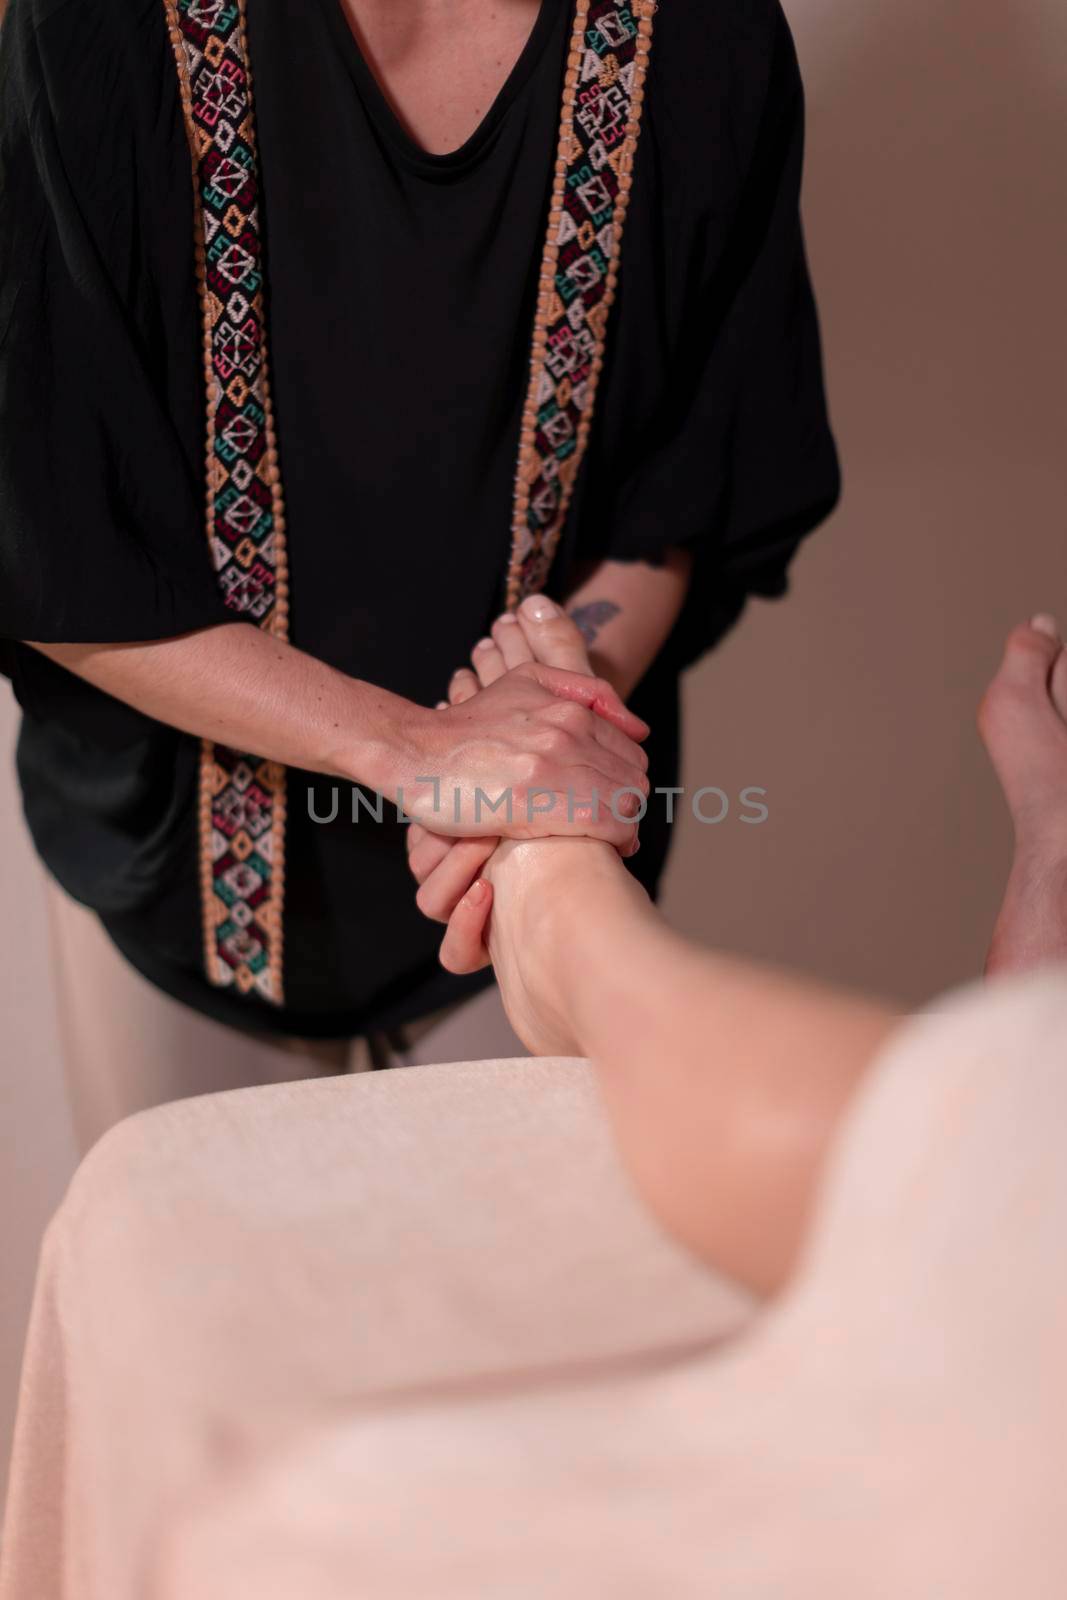 A masseuse massages the feet and legs of her patient, who is lying face up on the table to relieve her health issues and muscle pain